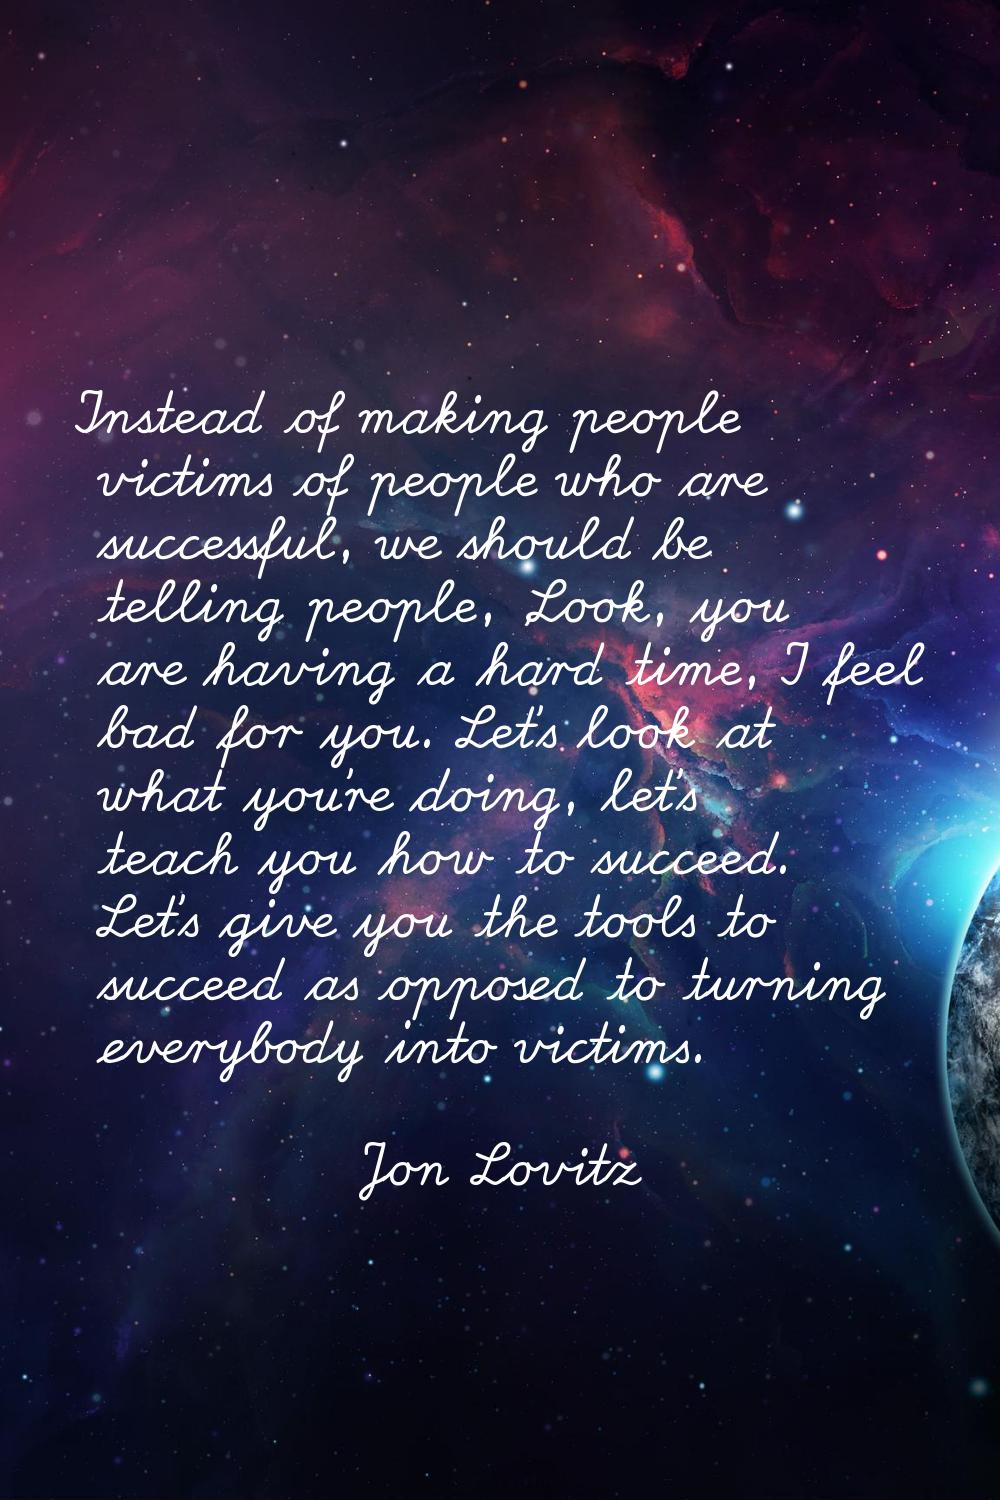 Instead of making people victims of people who are successful, we should be telling people, 'Look, 